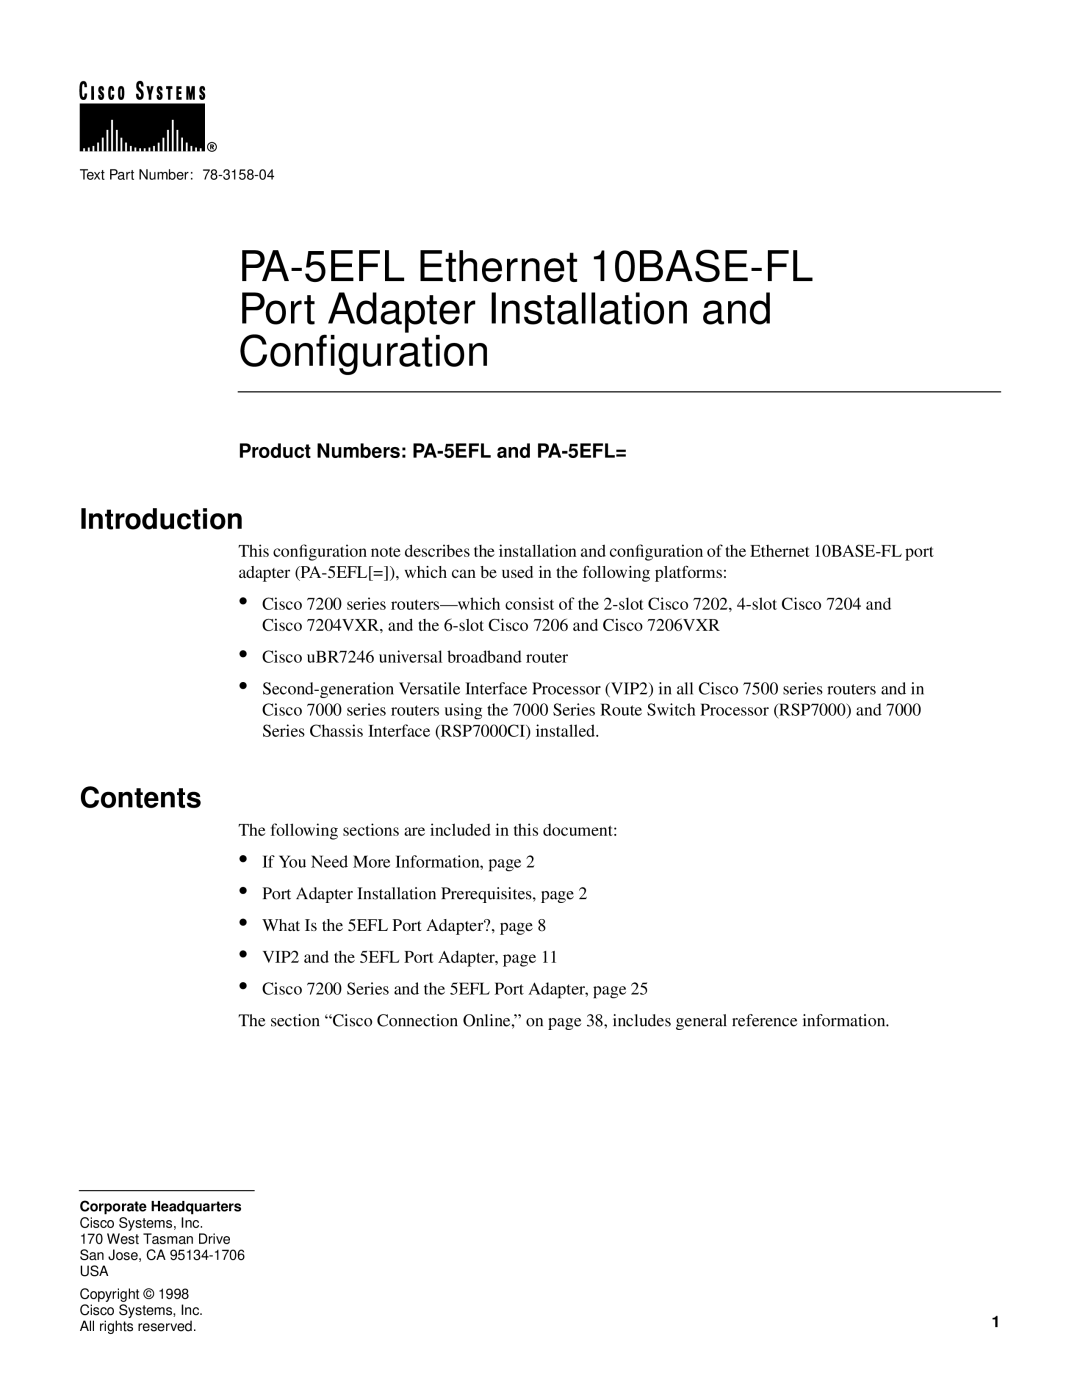 Cisco Systems 10BASE-FL manual Introduction, Contents, Product Numbers PA-5EFL and PA-5EFL= 